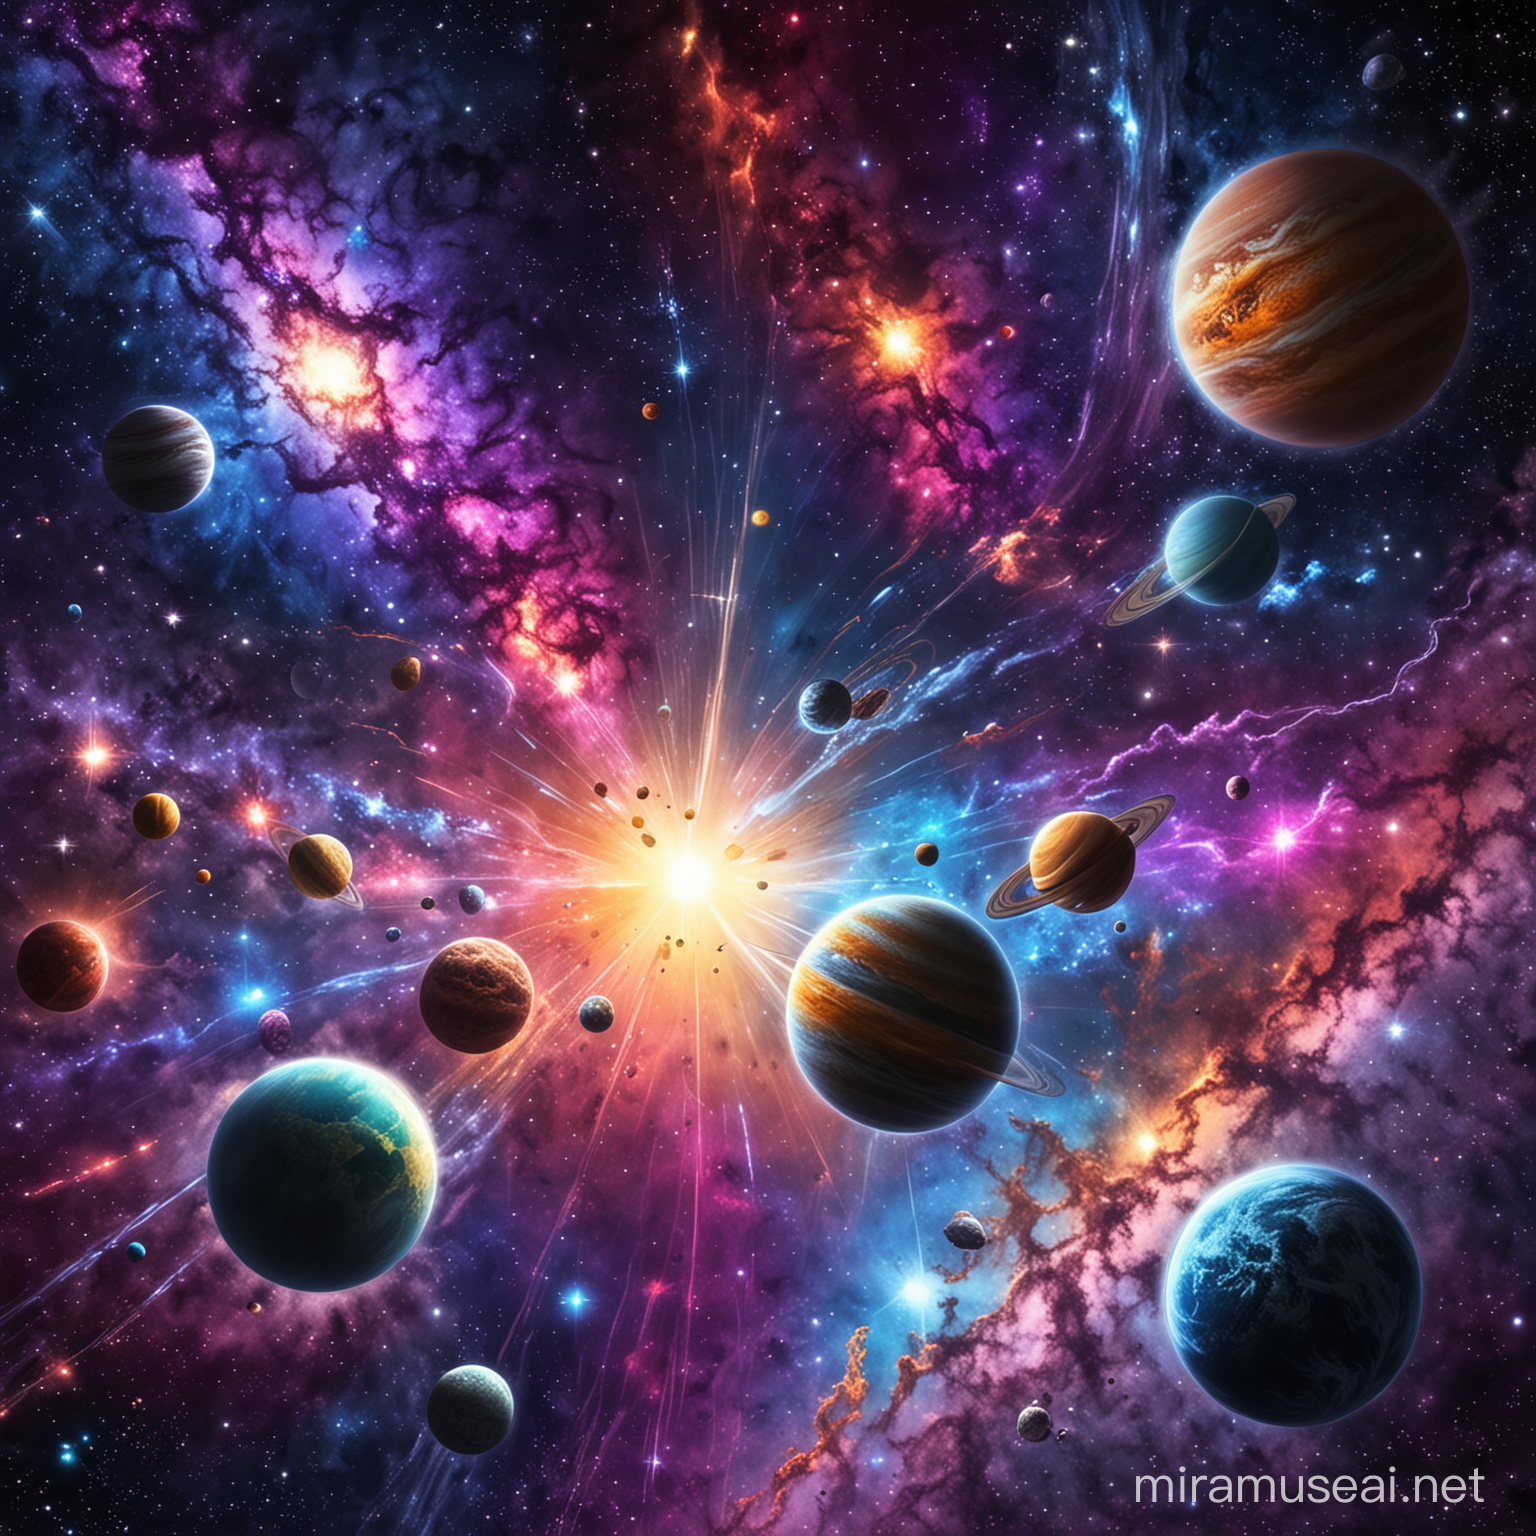 Galaxy background with different colors of planets and lightings